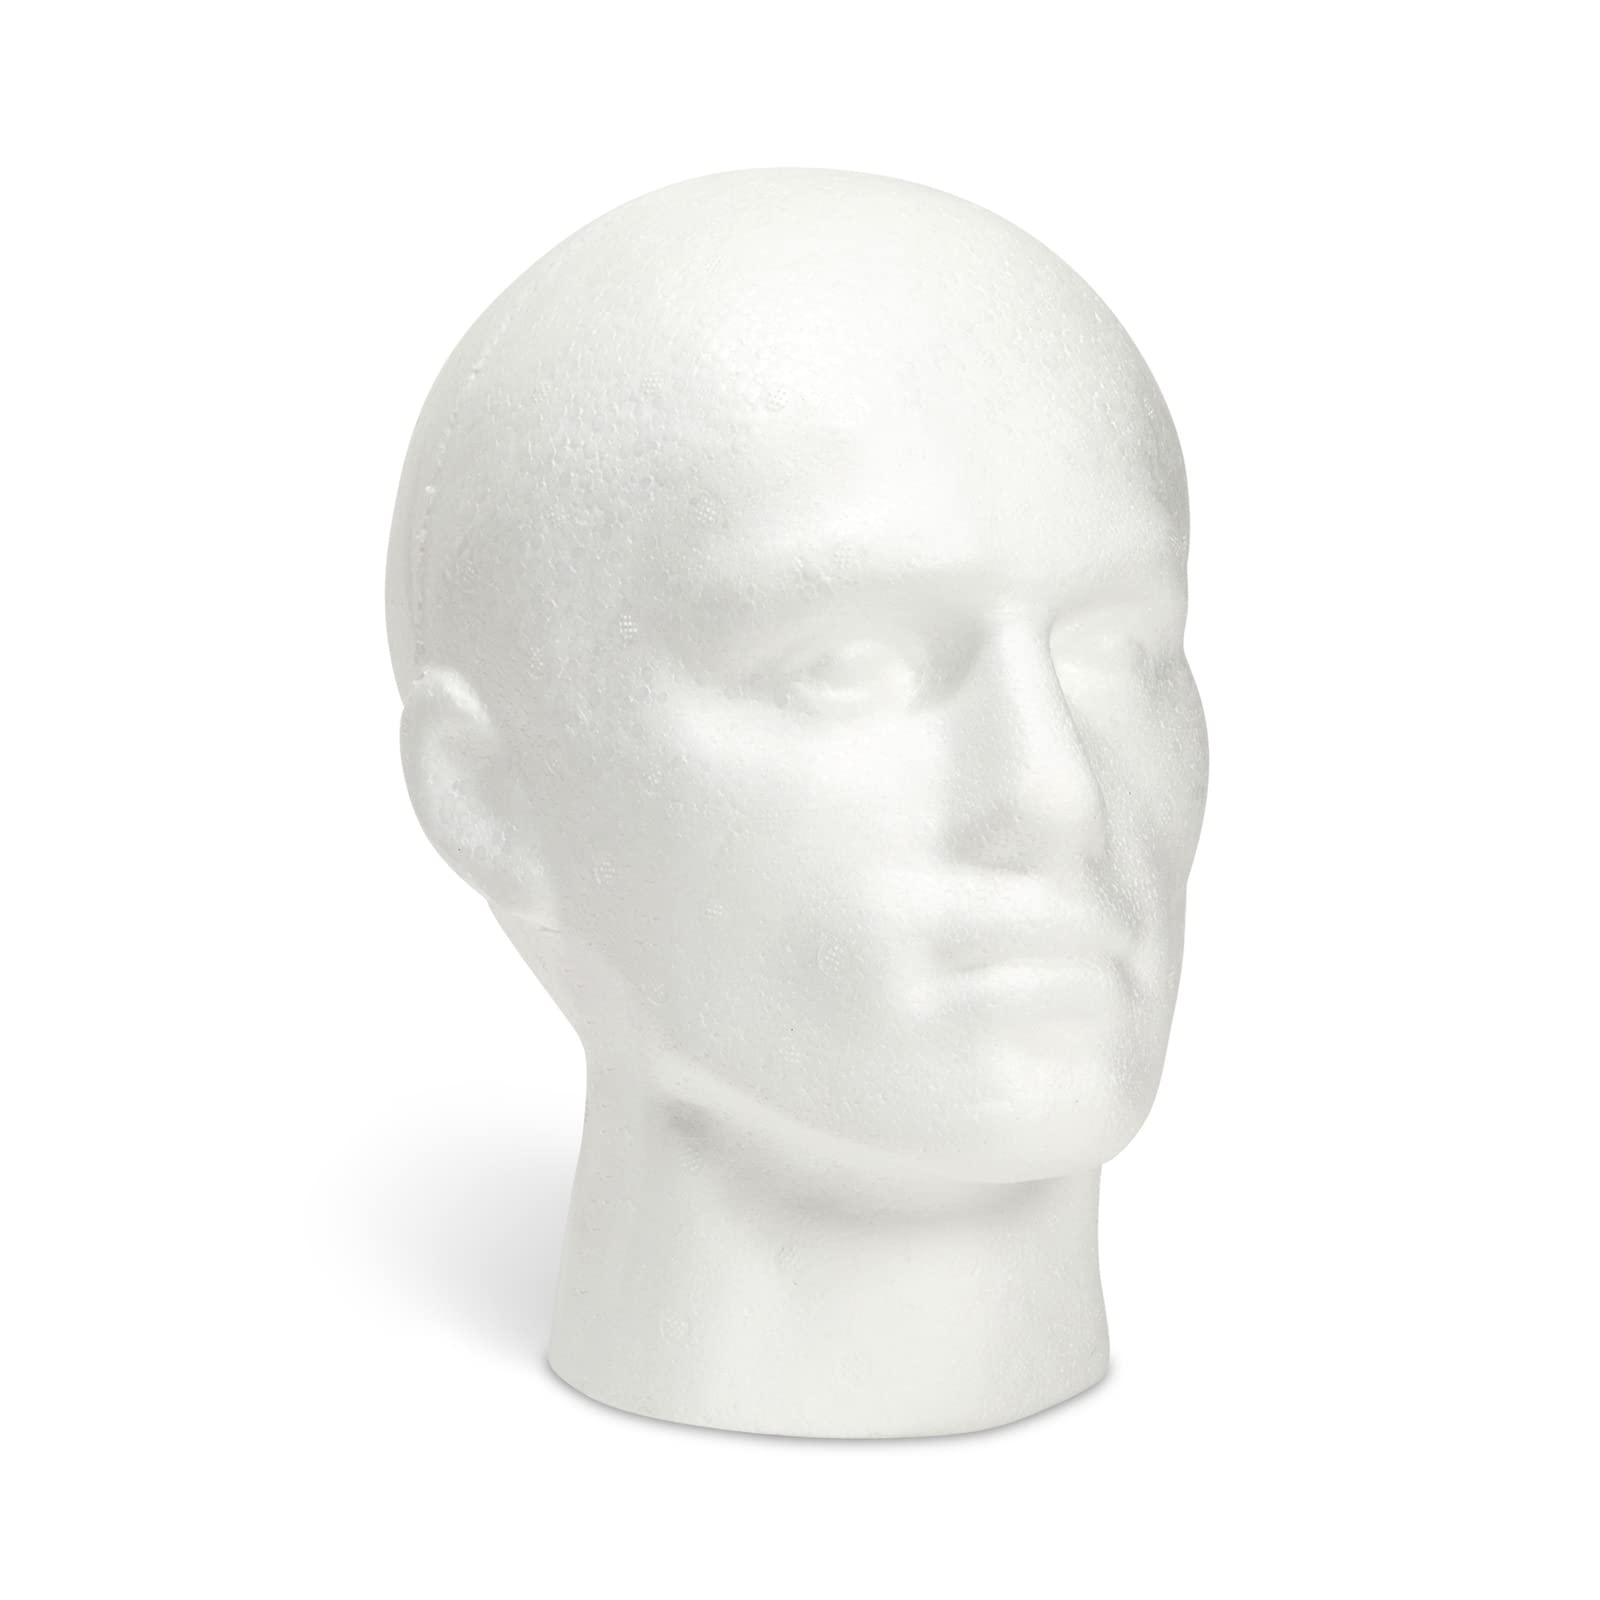 Juvale Male Head Form, Foam Mannequin Display for Hats, Wigs, Mask